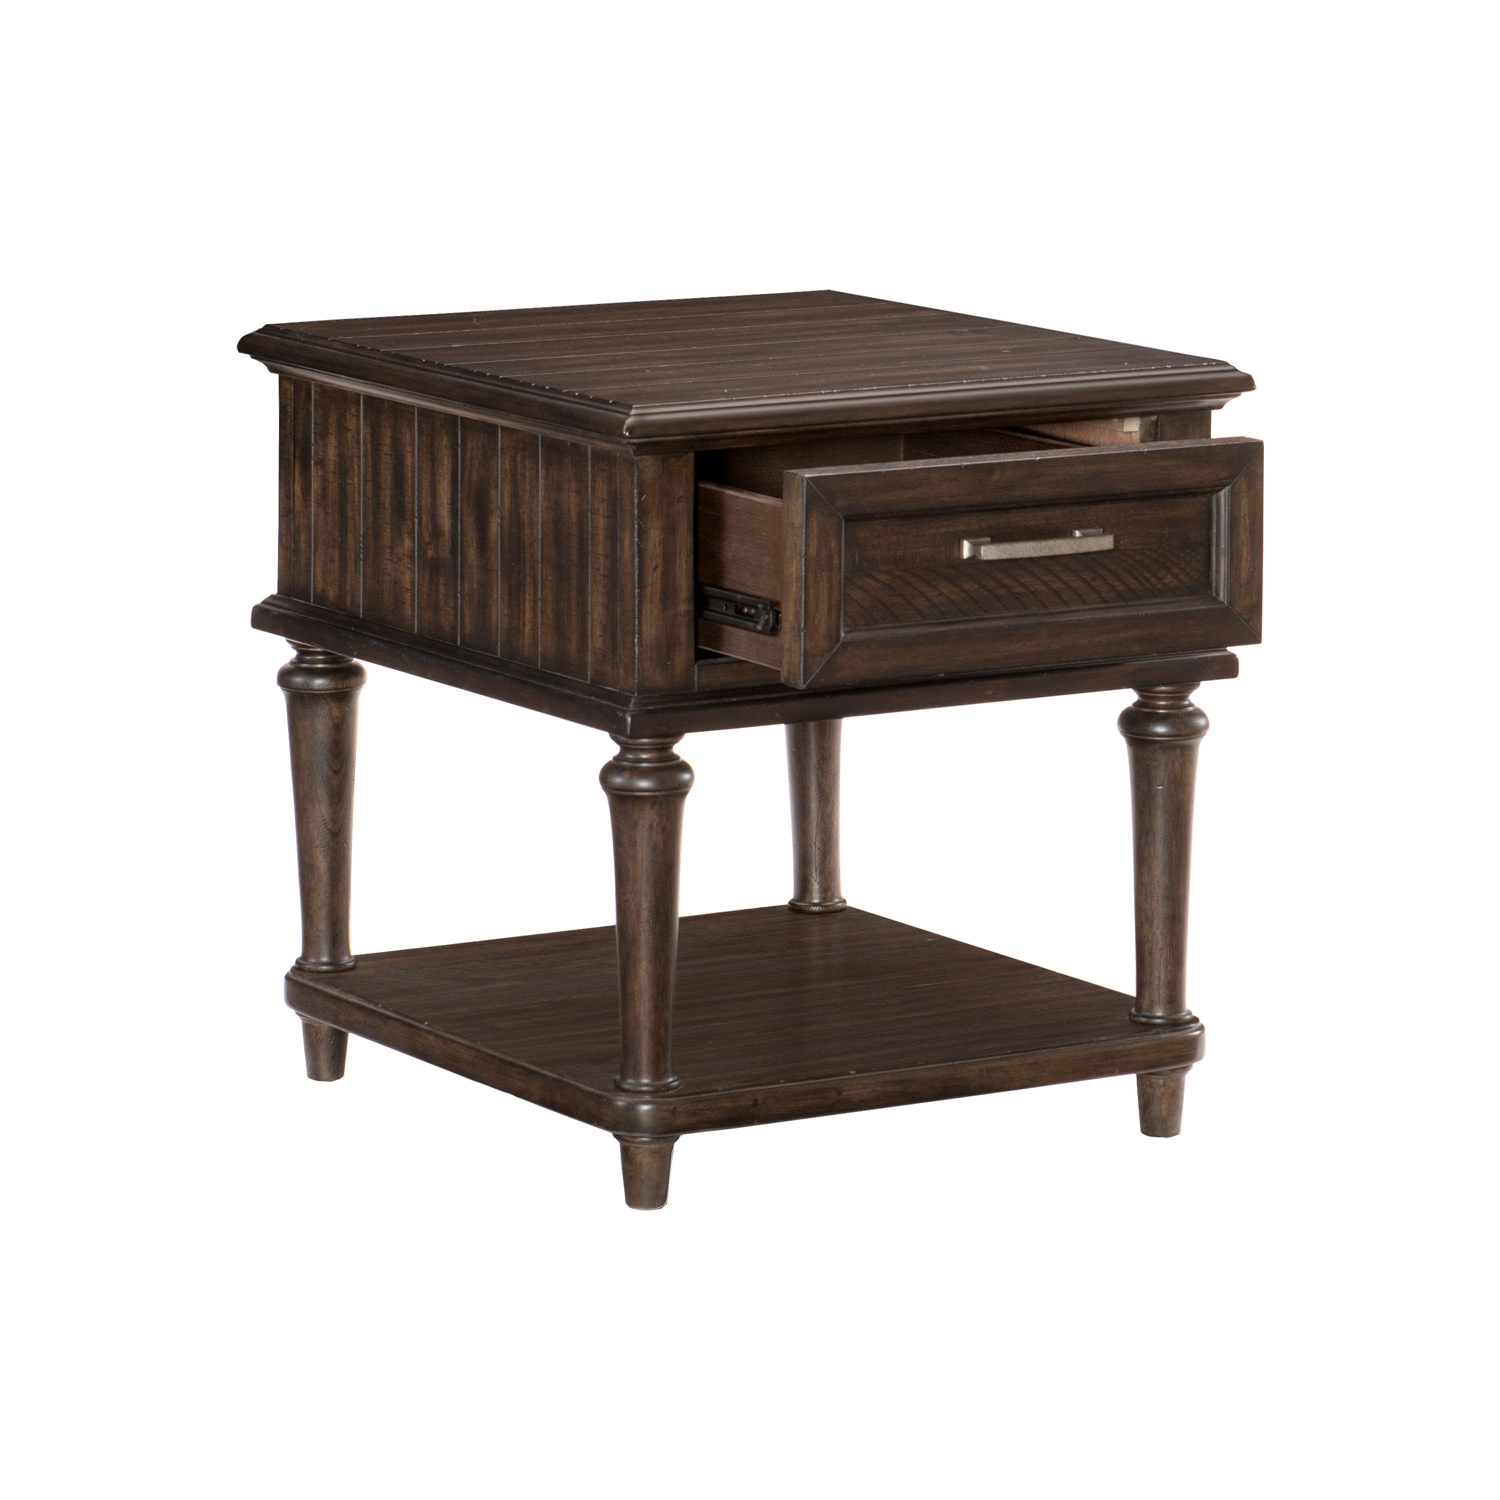 Homelegance Cardano End Table with Functional Drawer - Driftwood Charcoal